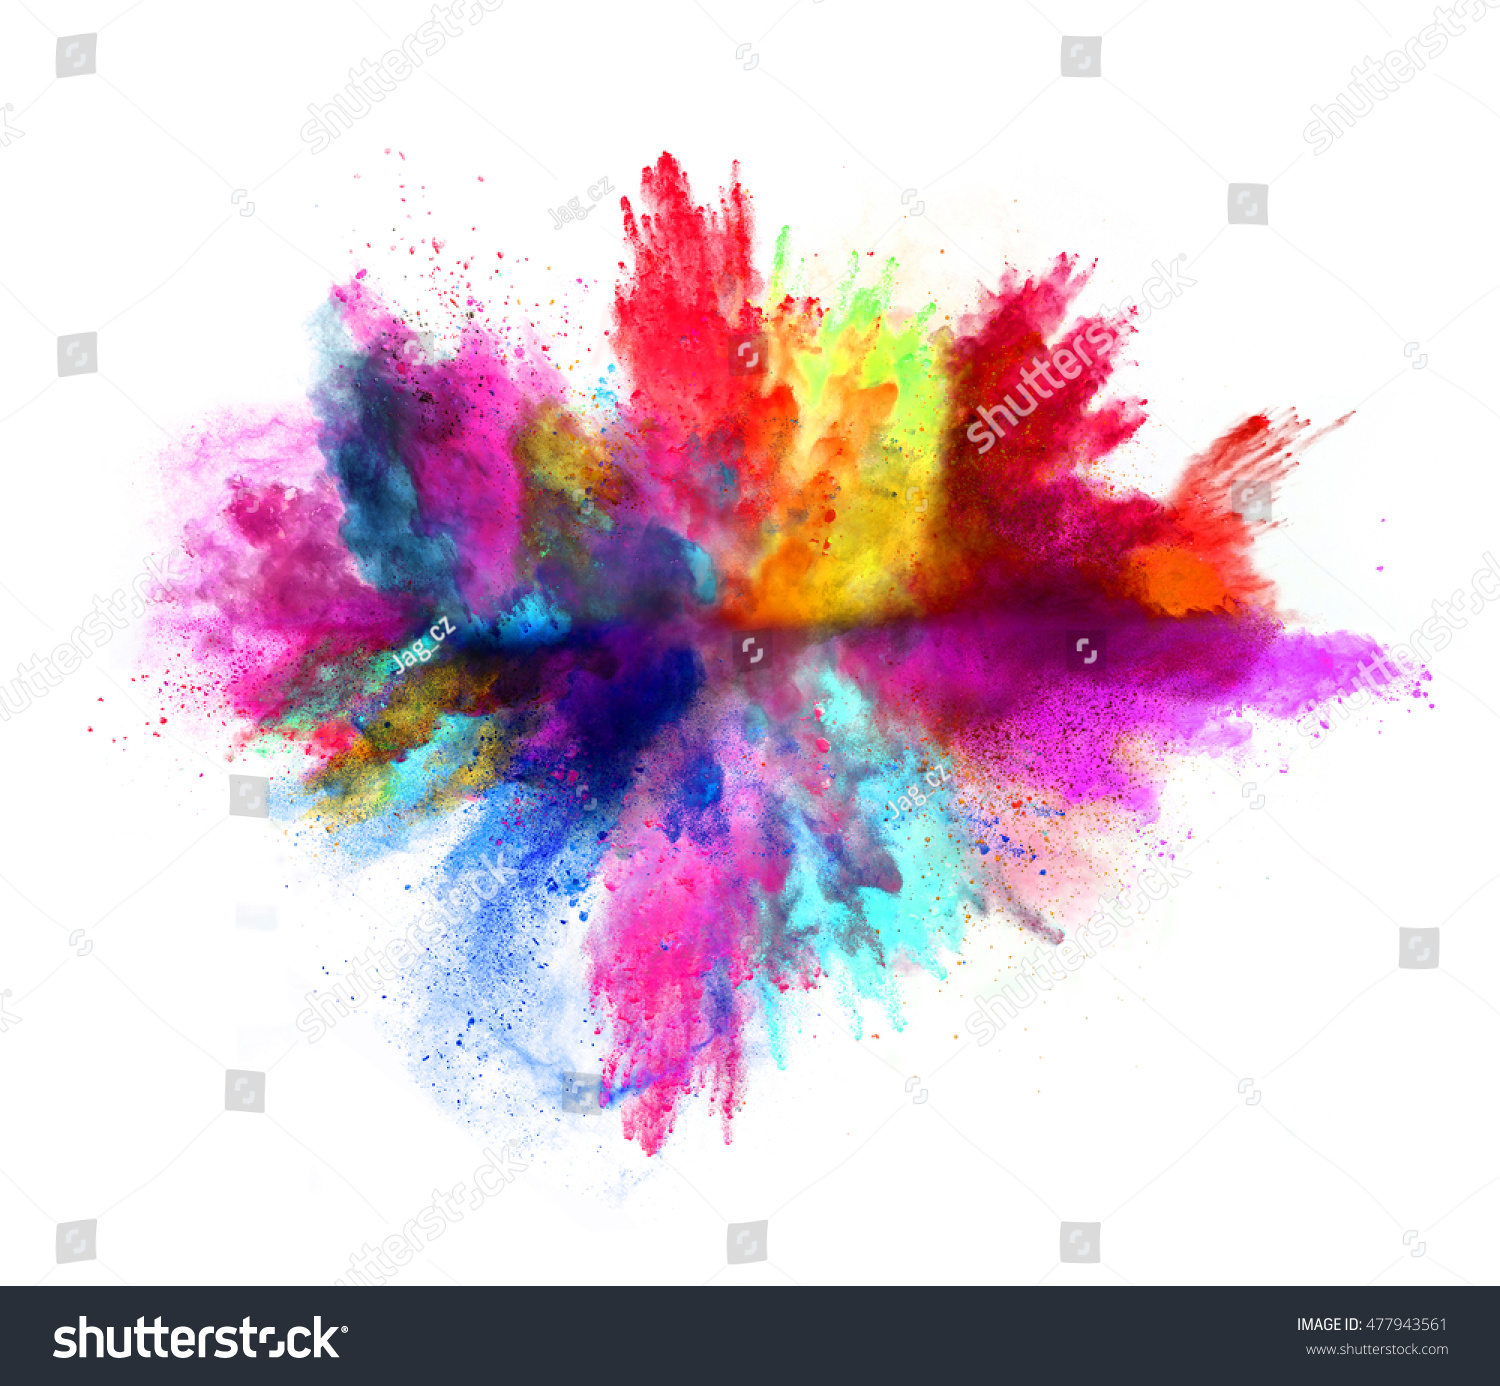 Explosion of colored powder, isolated on white background #477943561